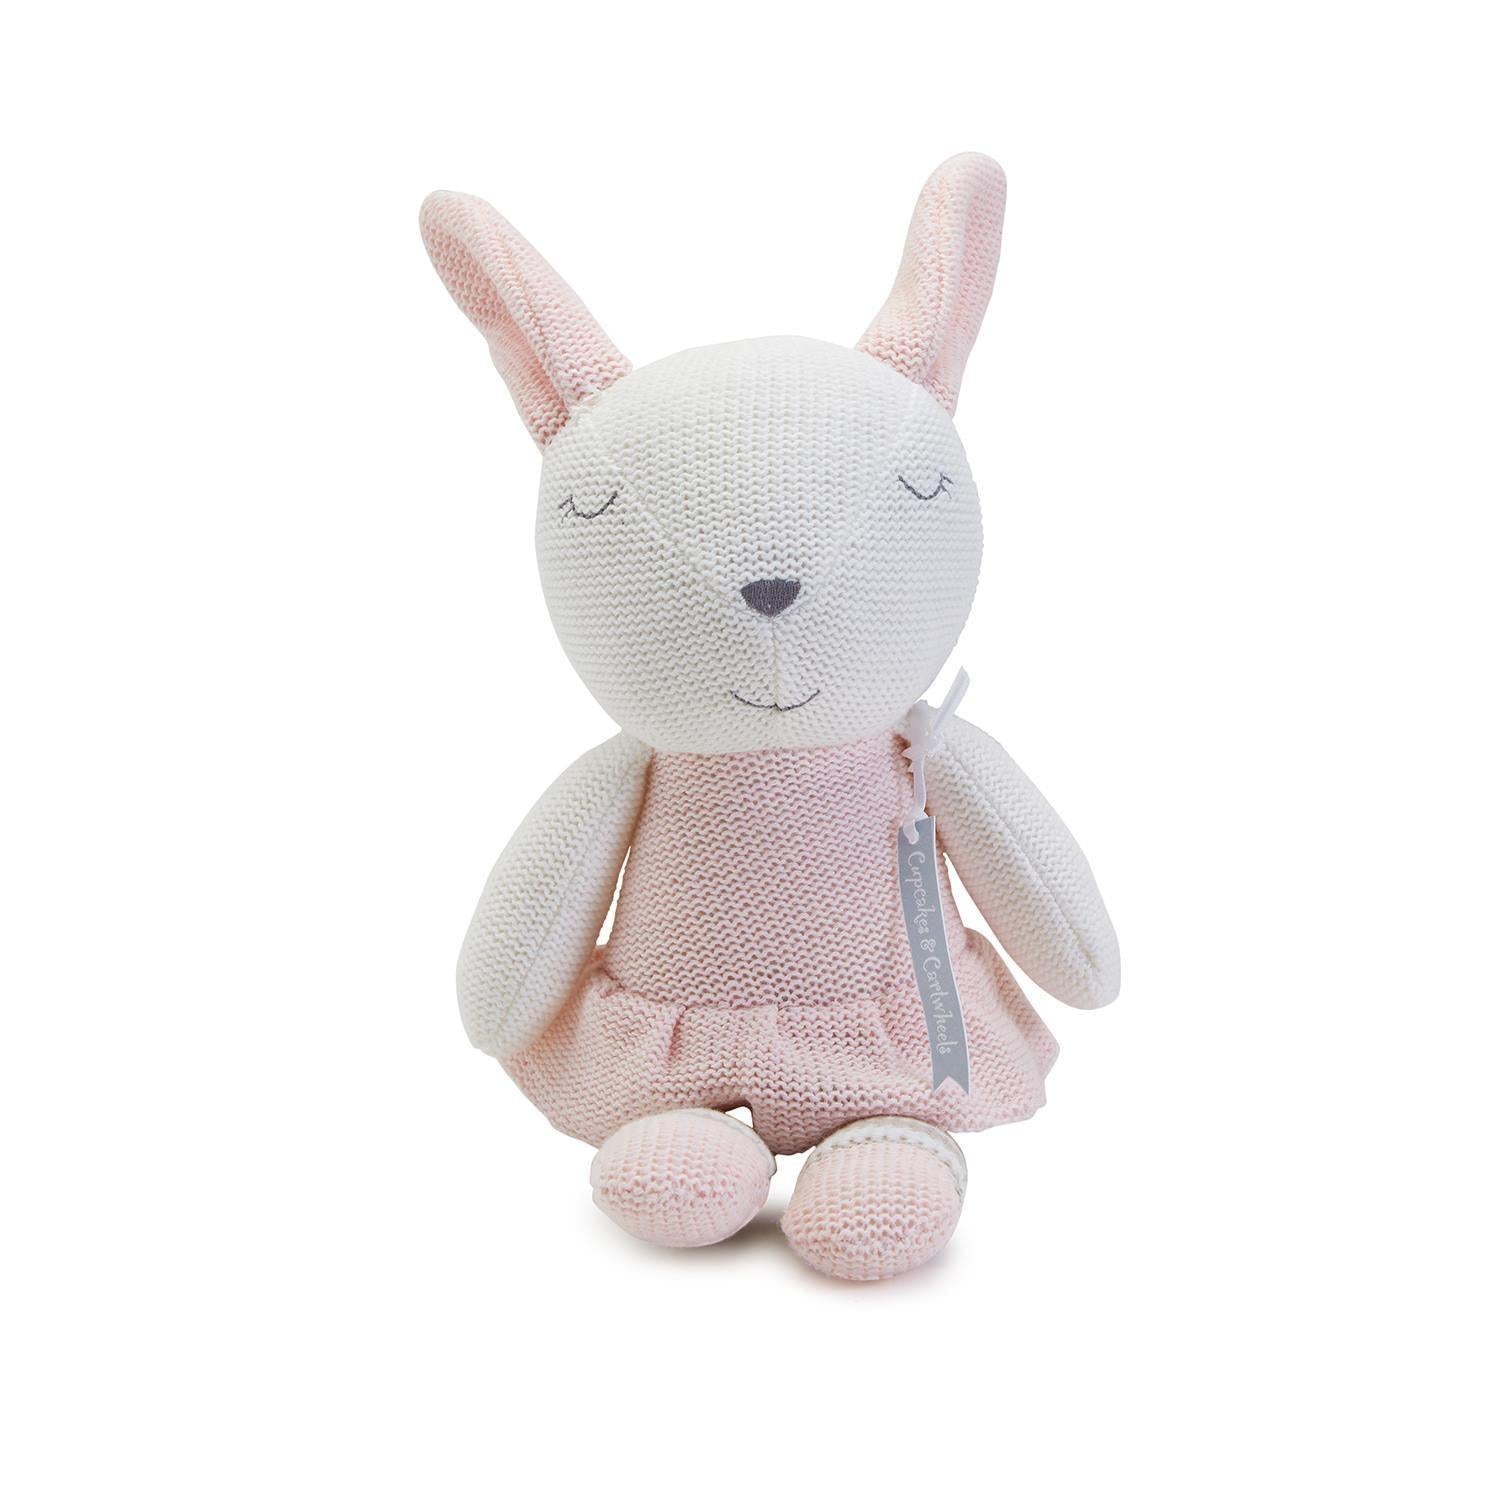 Knitted Cuddle Bunny - Elegant Linen